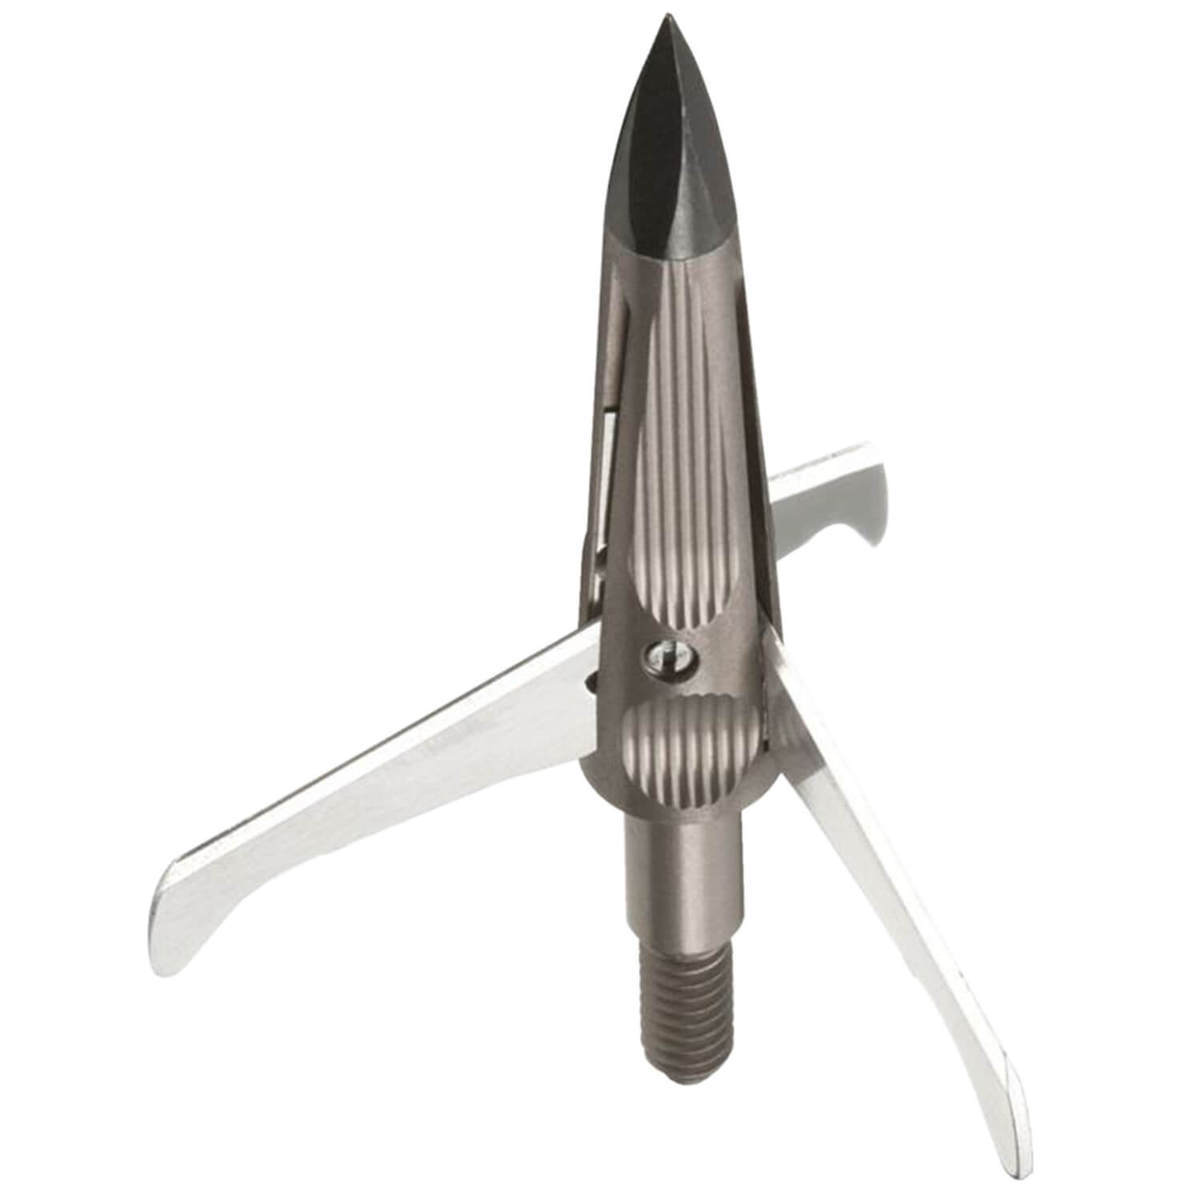 Nap Spitfire Maxx For Crossbow 100gr Trophy Tip Broadhead 3 Pack Sportsmans Warehouse 2300